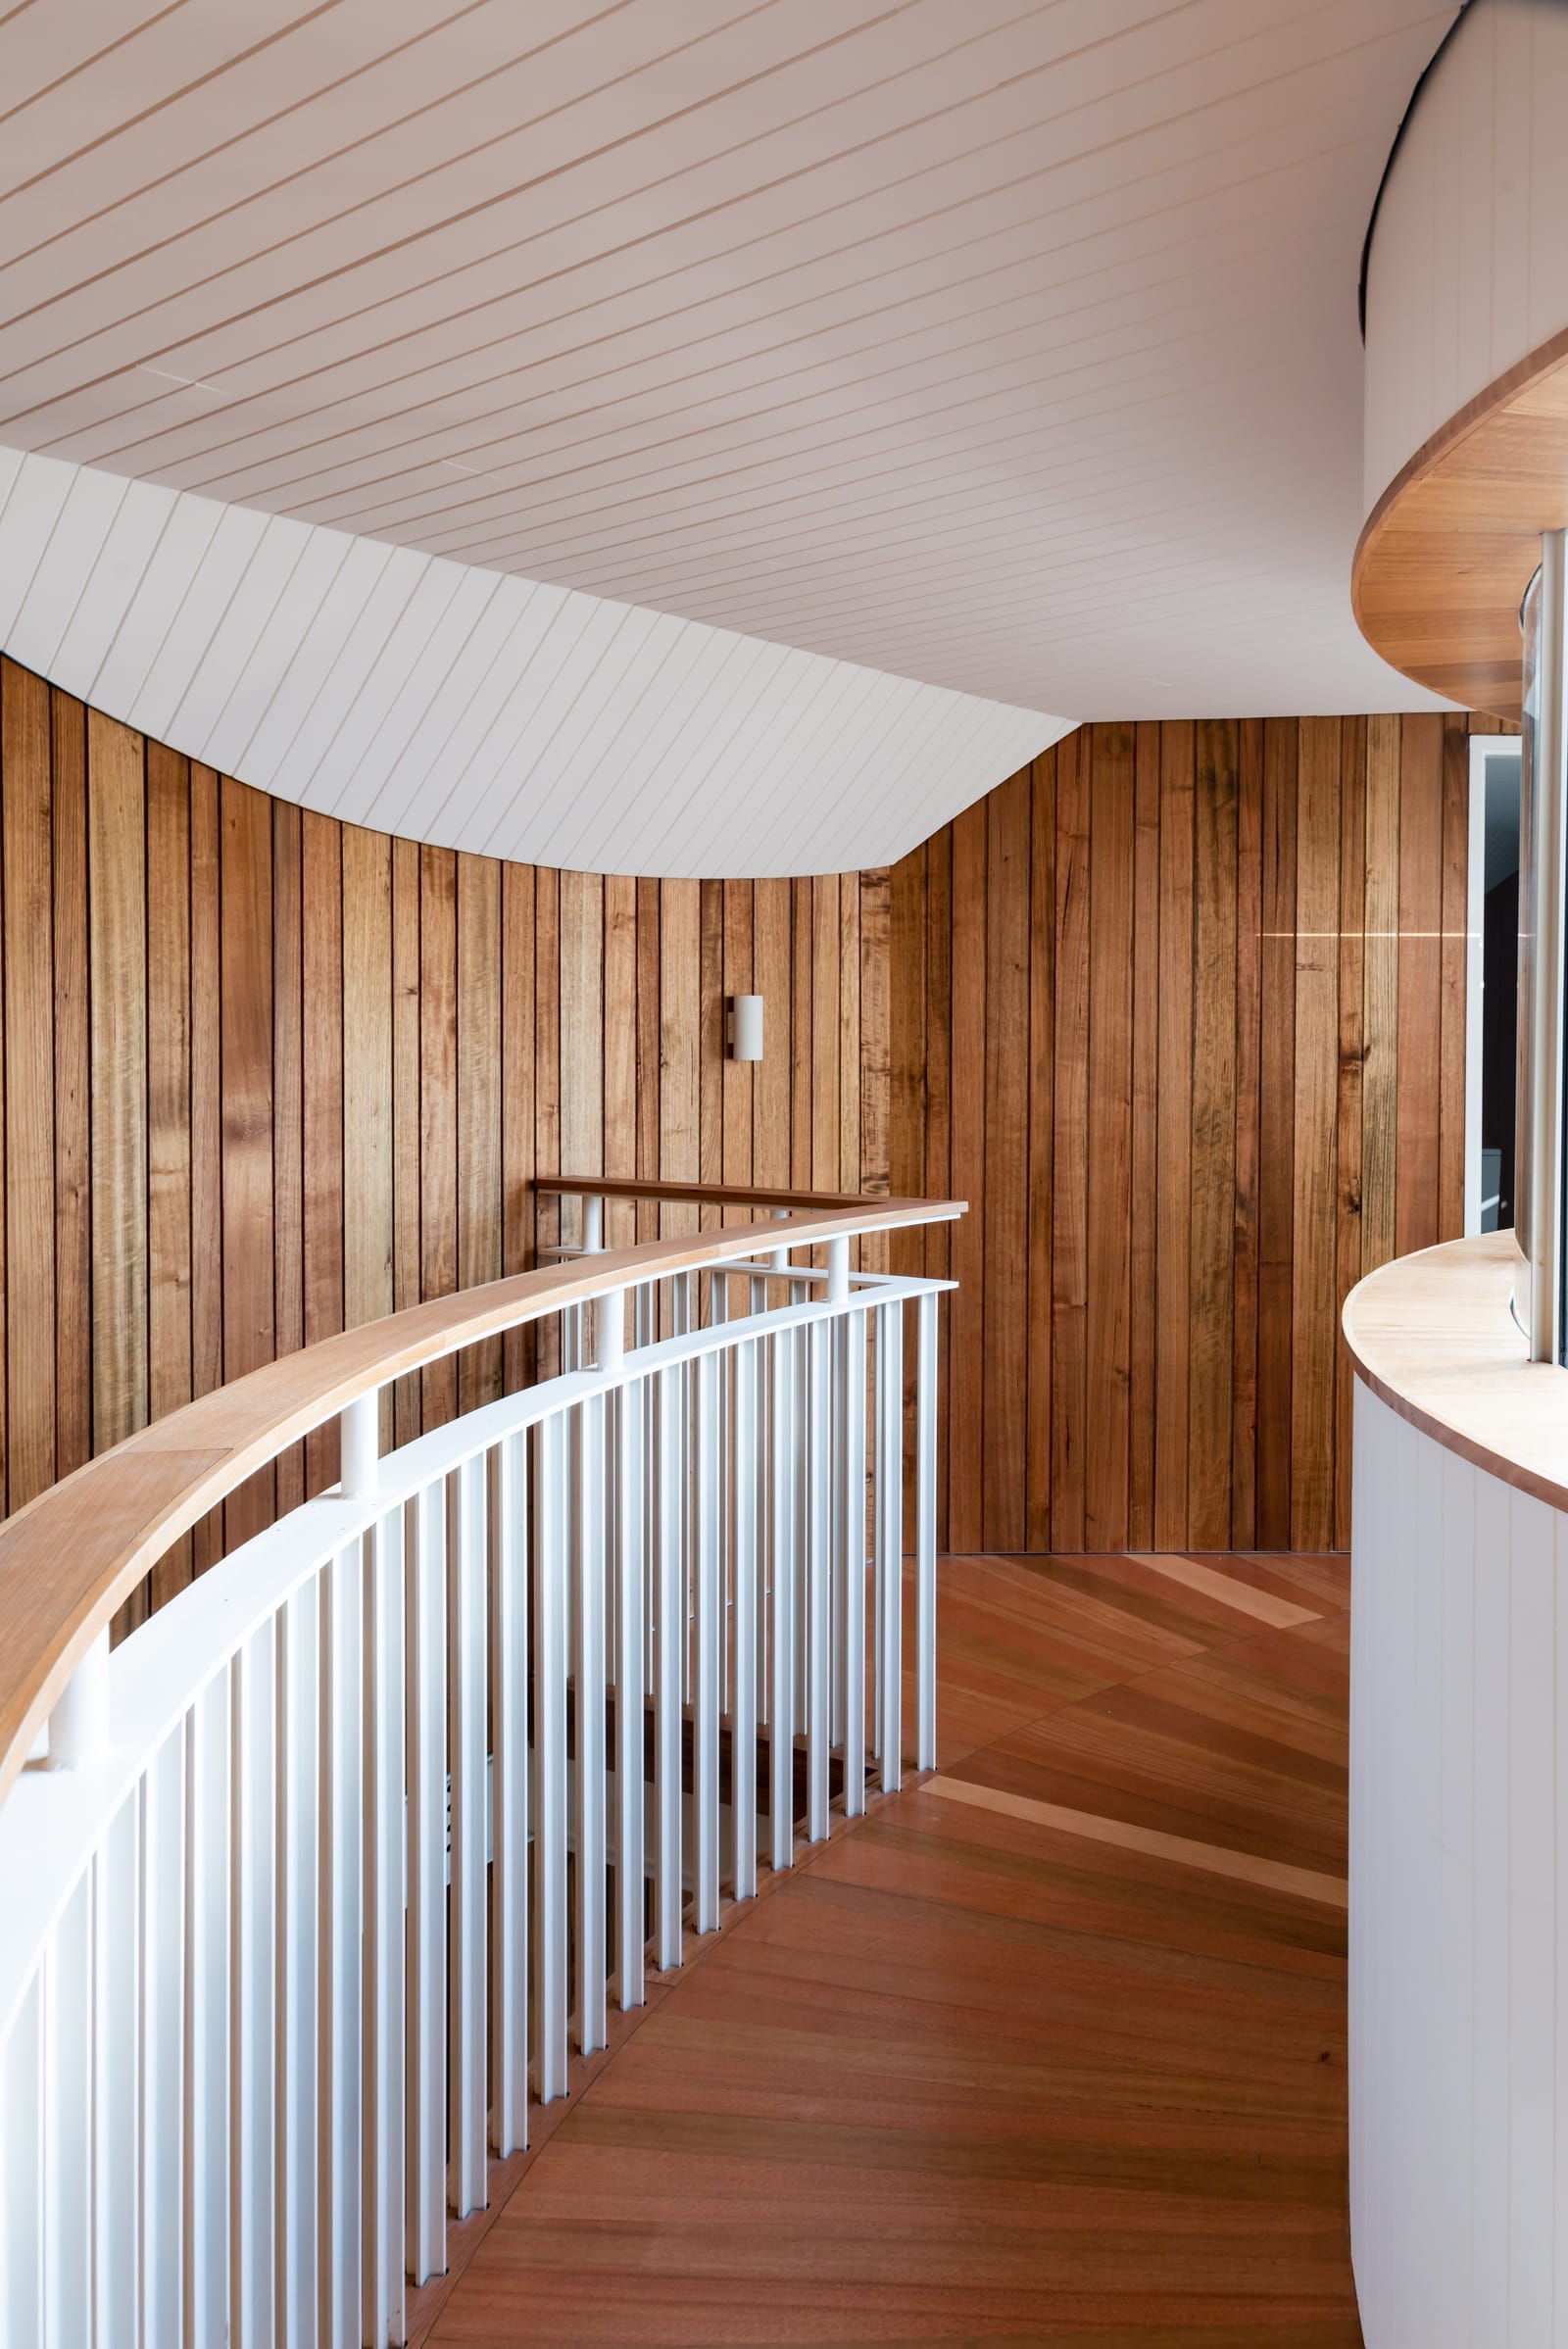 Wattle Bird House by Flett Architecture. Photography by Matt Sansom. Curved timber staircase with white metal and timber balustrade. Timber floors and walls.